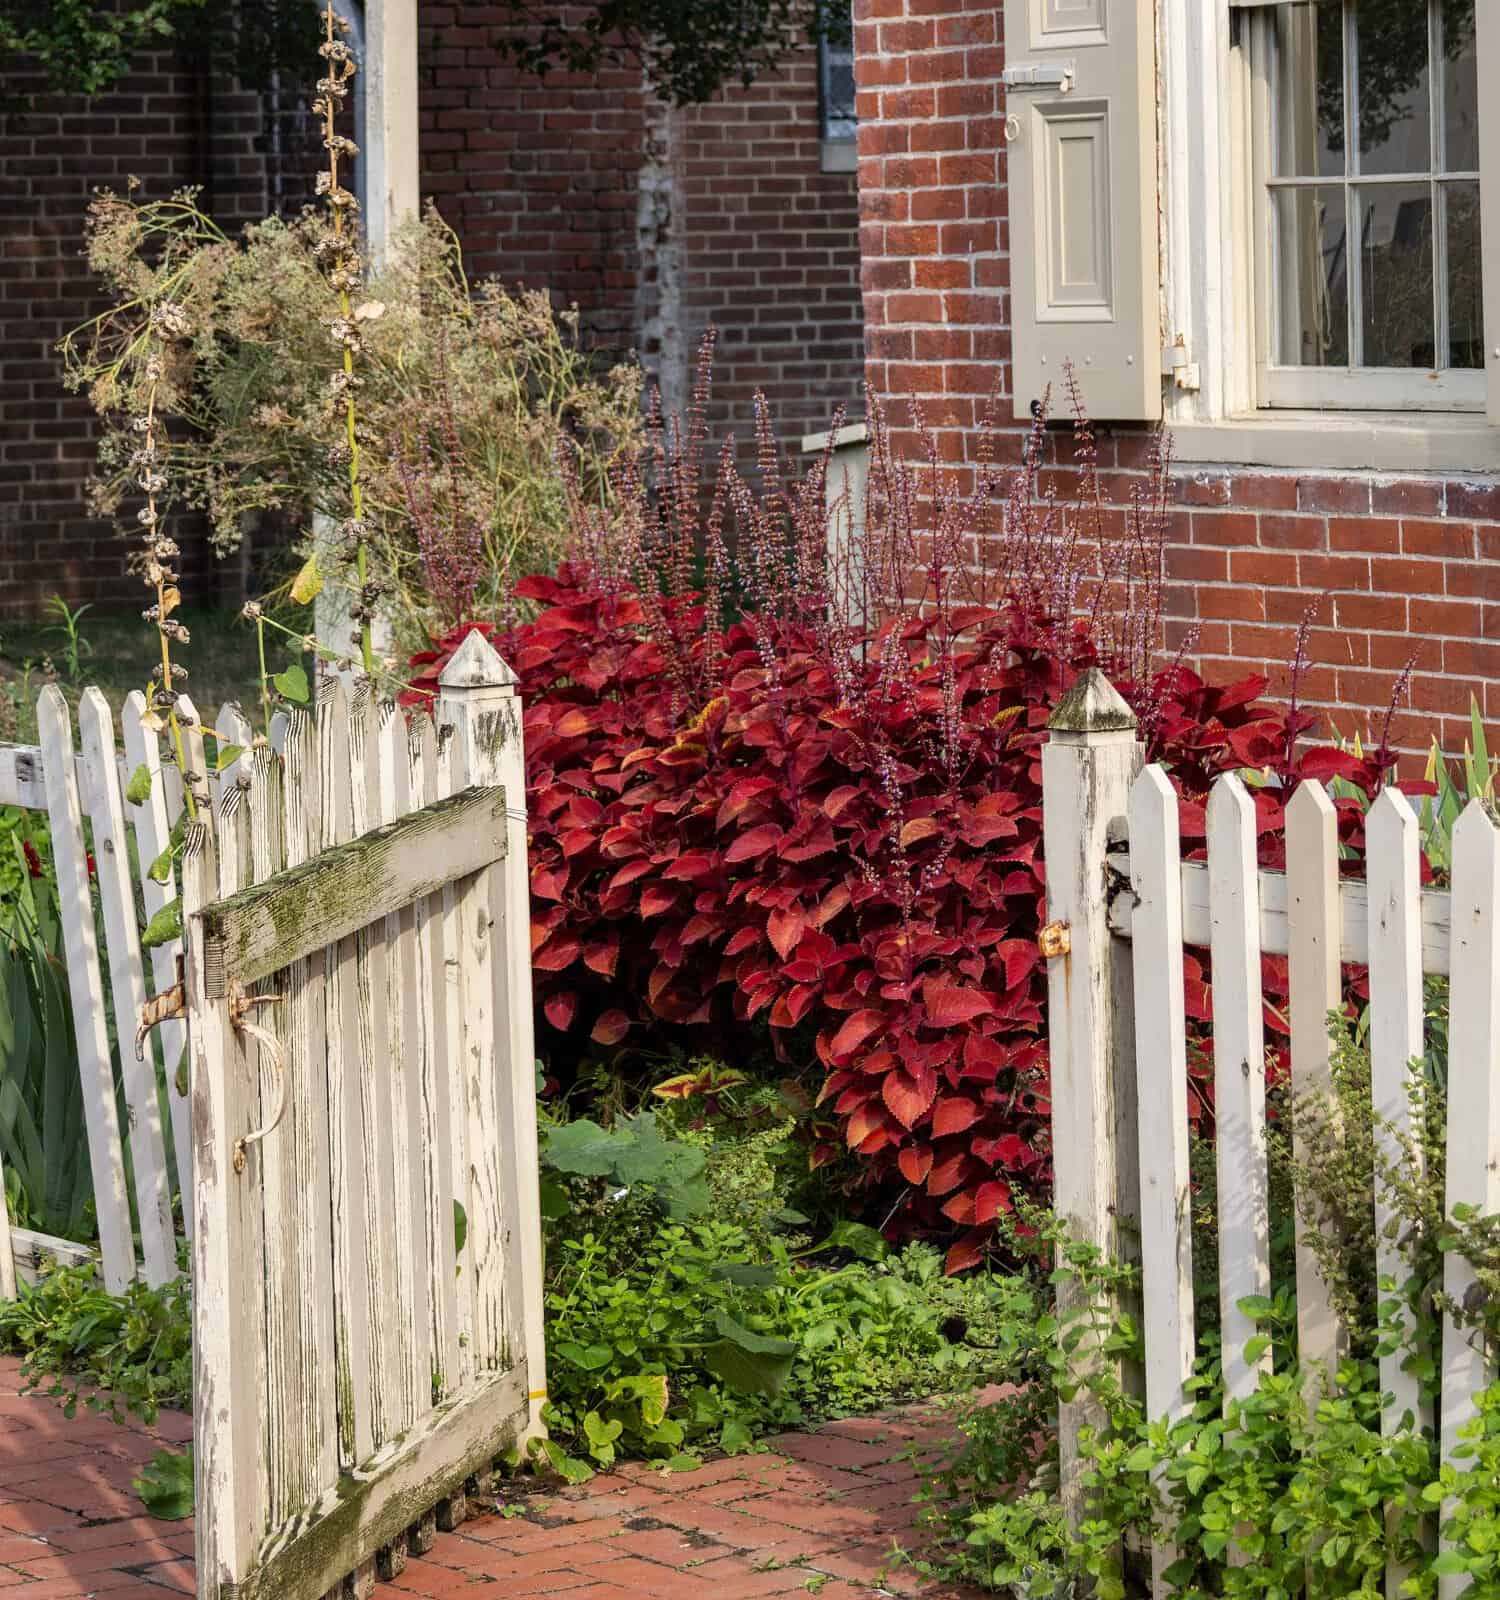 The entrance to the back garden of the Edgar Allen Poe house in Philadelphia has beautiful foliage, a dilapidated old picket fence, and a brick wall.